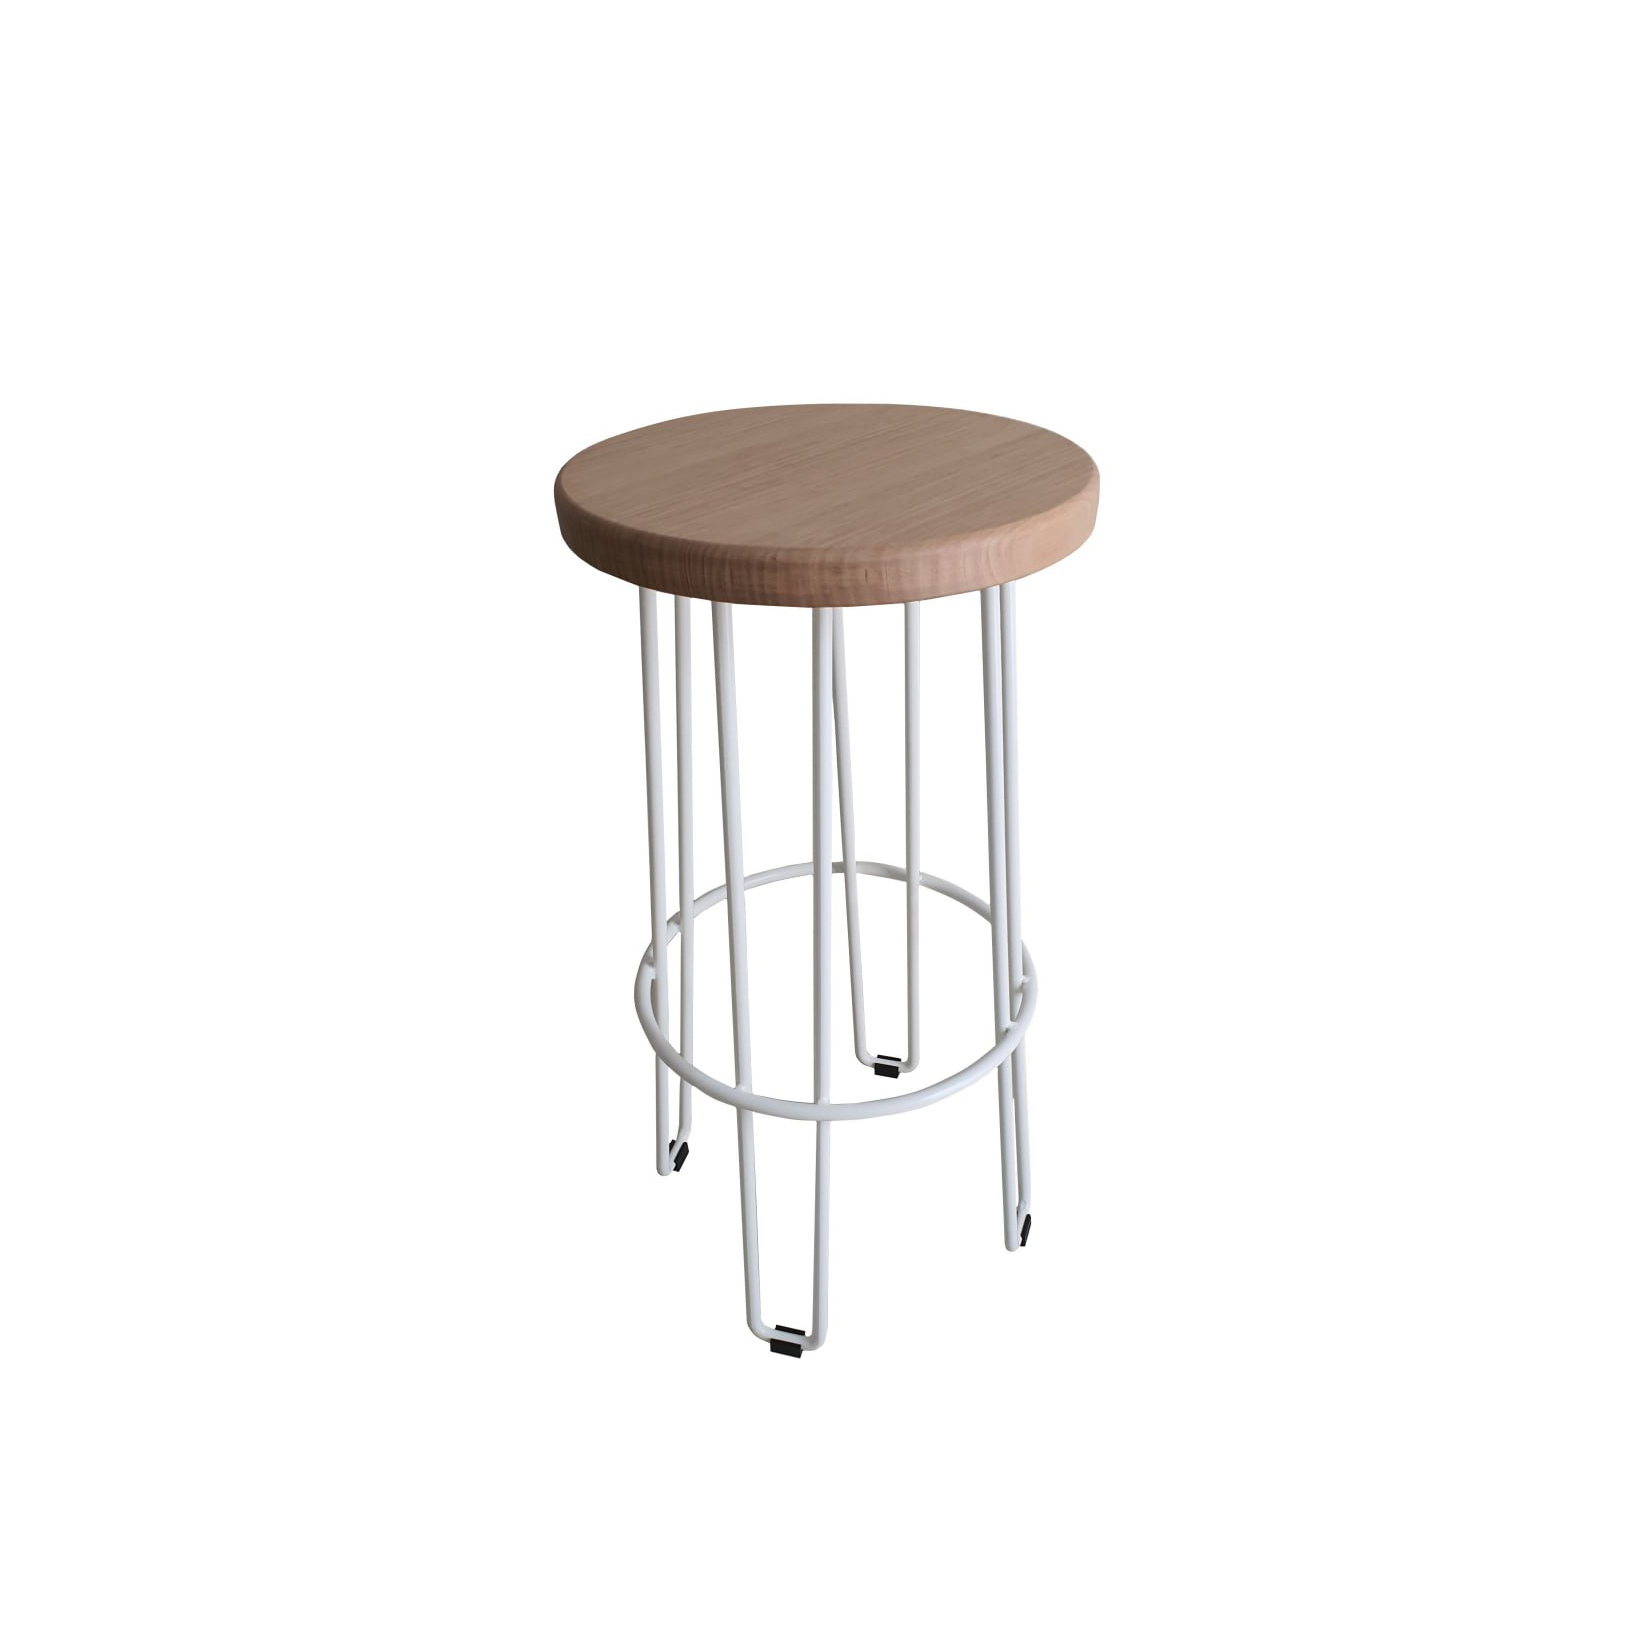 Alice Bar Stool with Round Solid Wood Seat